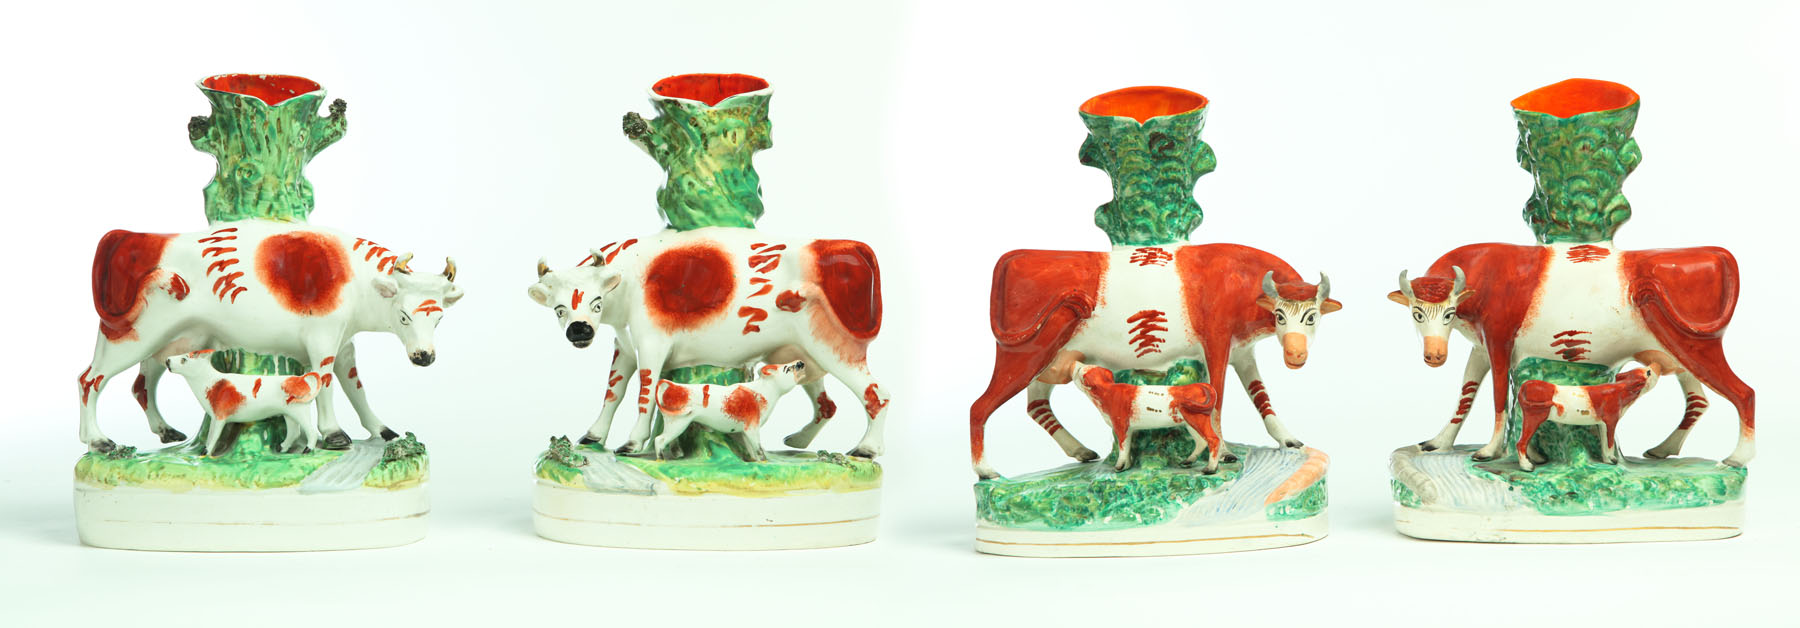 TWO PAIR OF STAFFORDSHIRE SPILL 1137d1